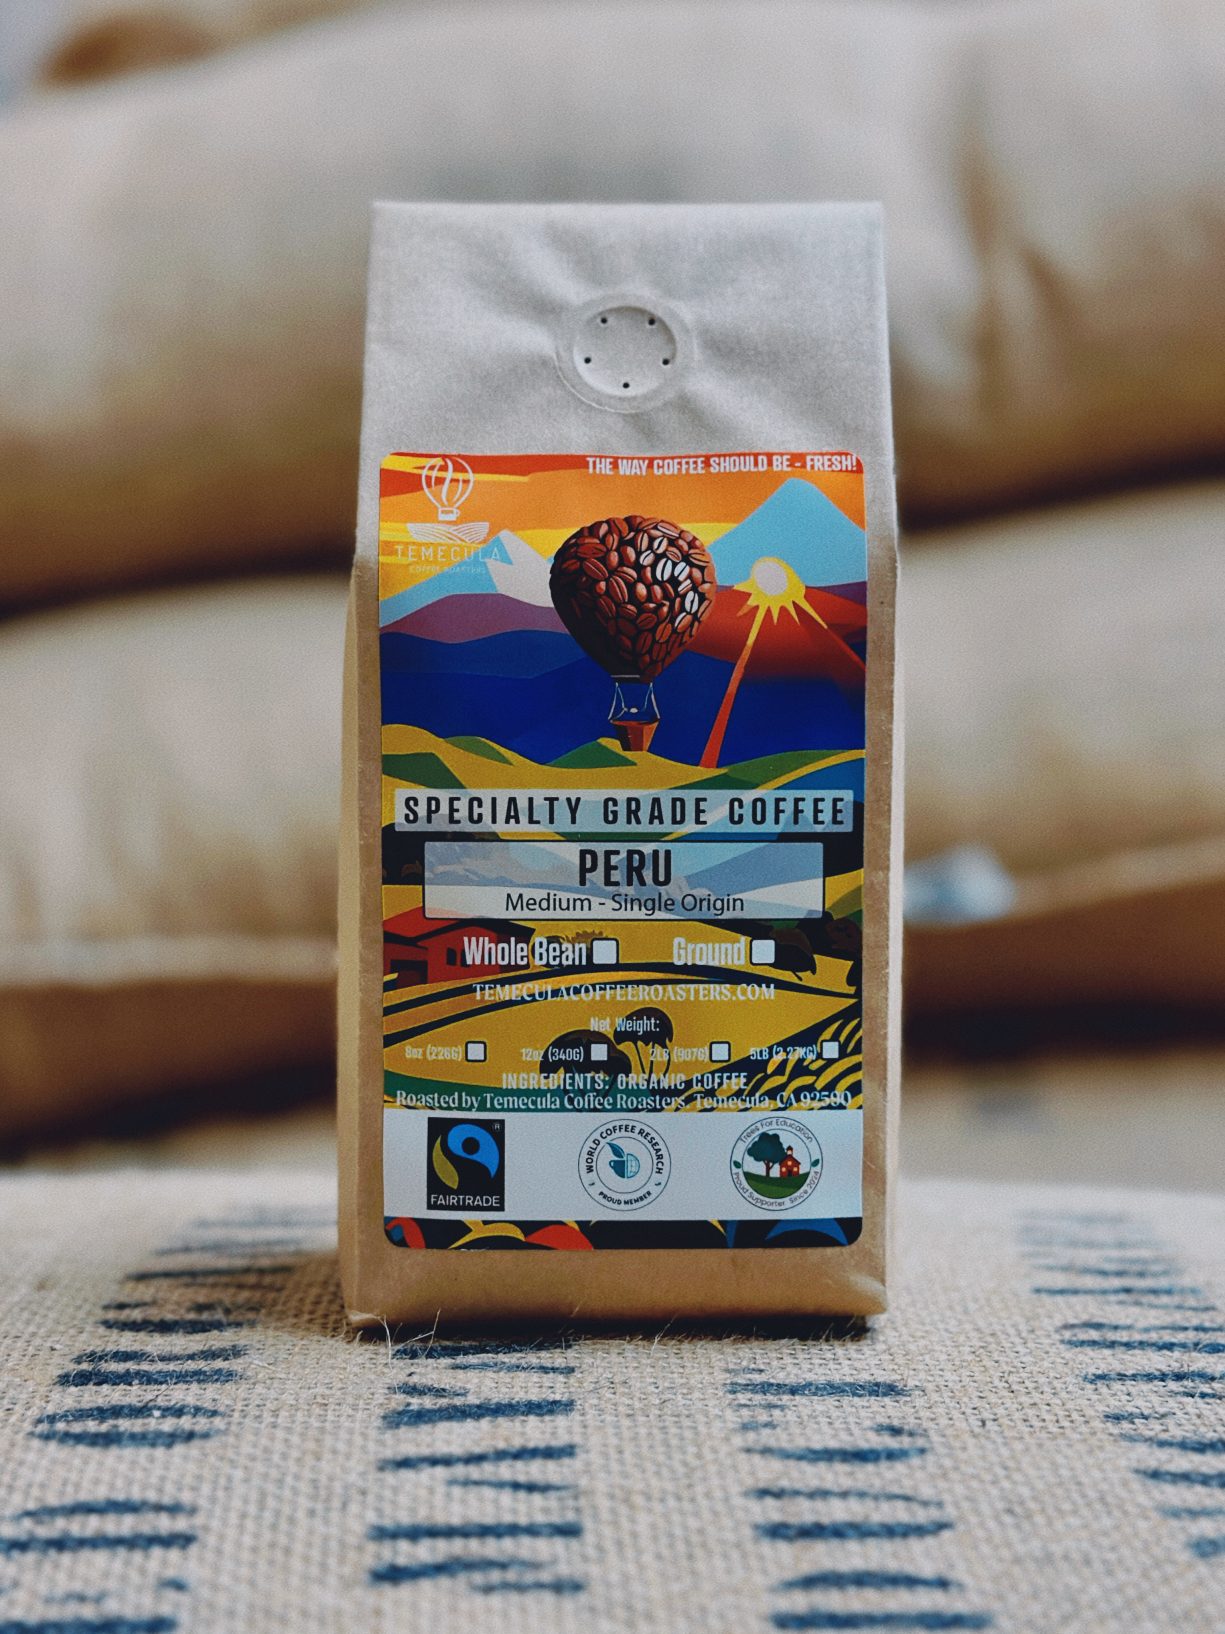 A bag of Temecula Coffee Roaster's Fairtrade, specialty grade coffee from Peru sits atop a stack of sacks containing coffee beans.